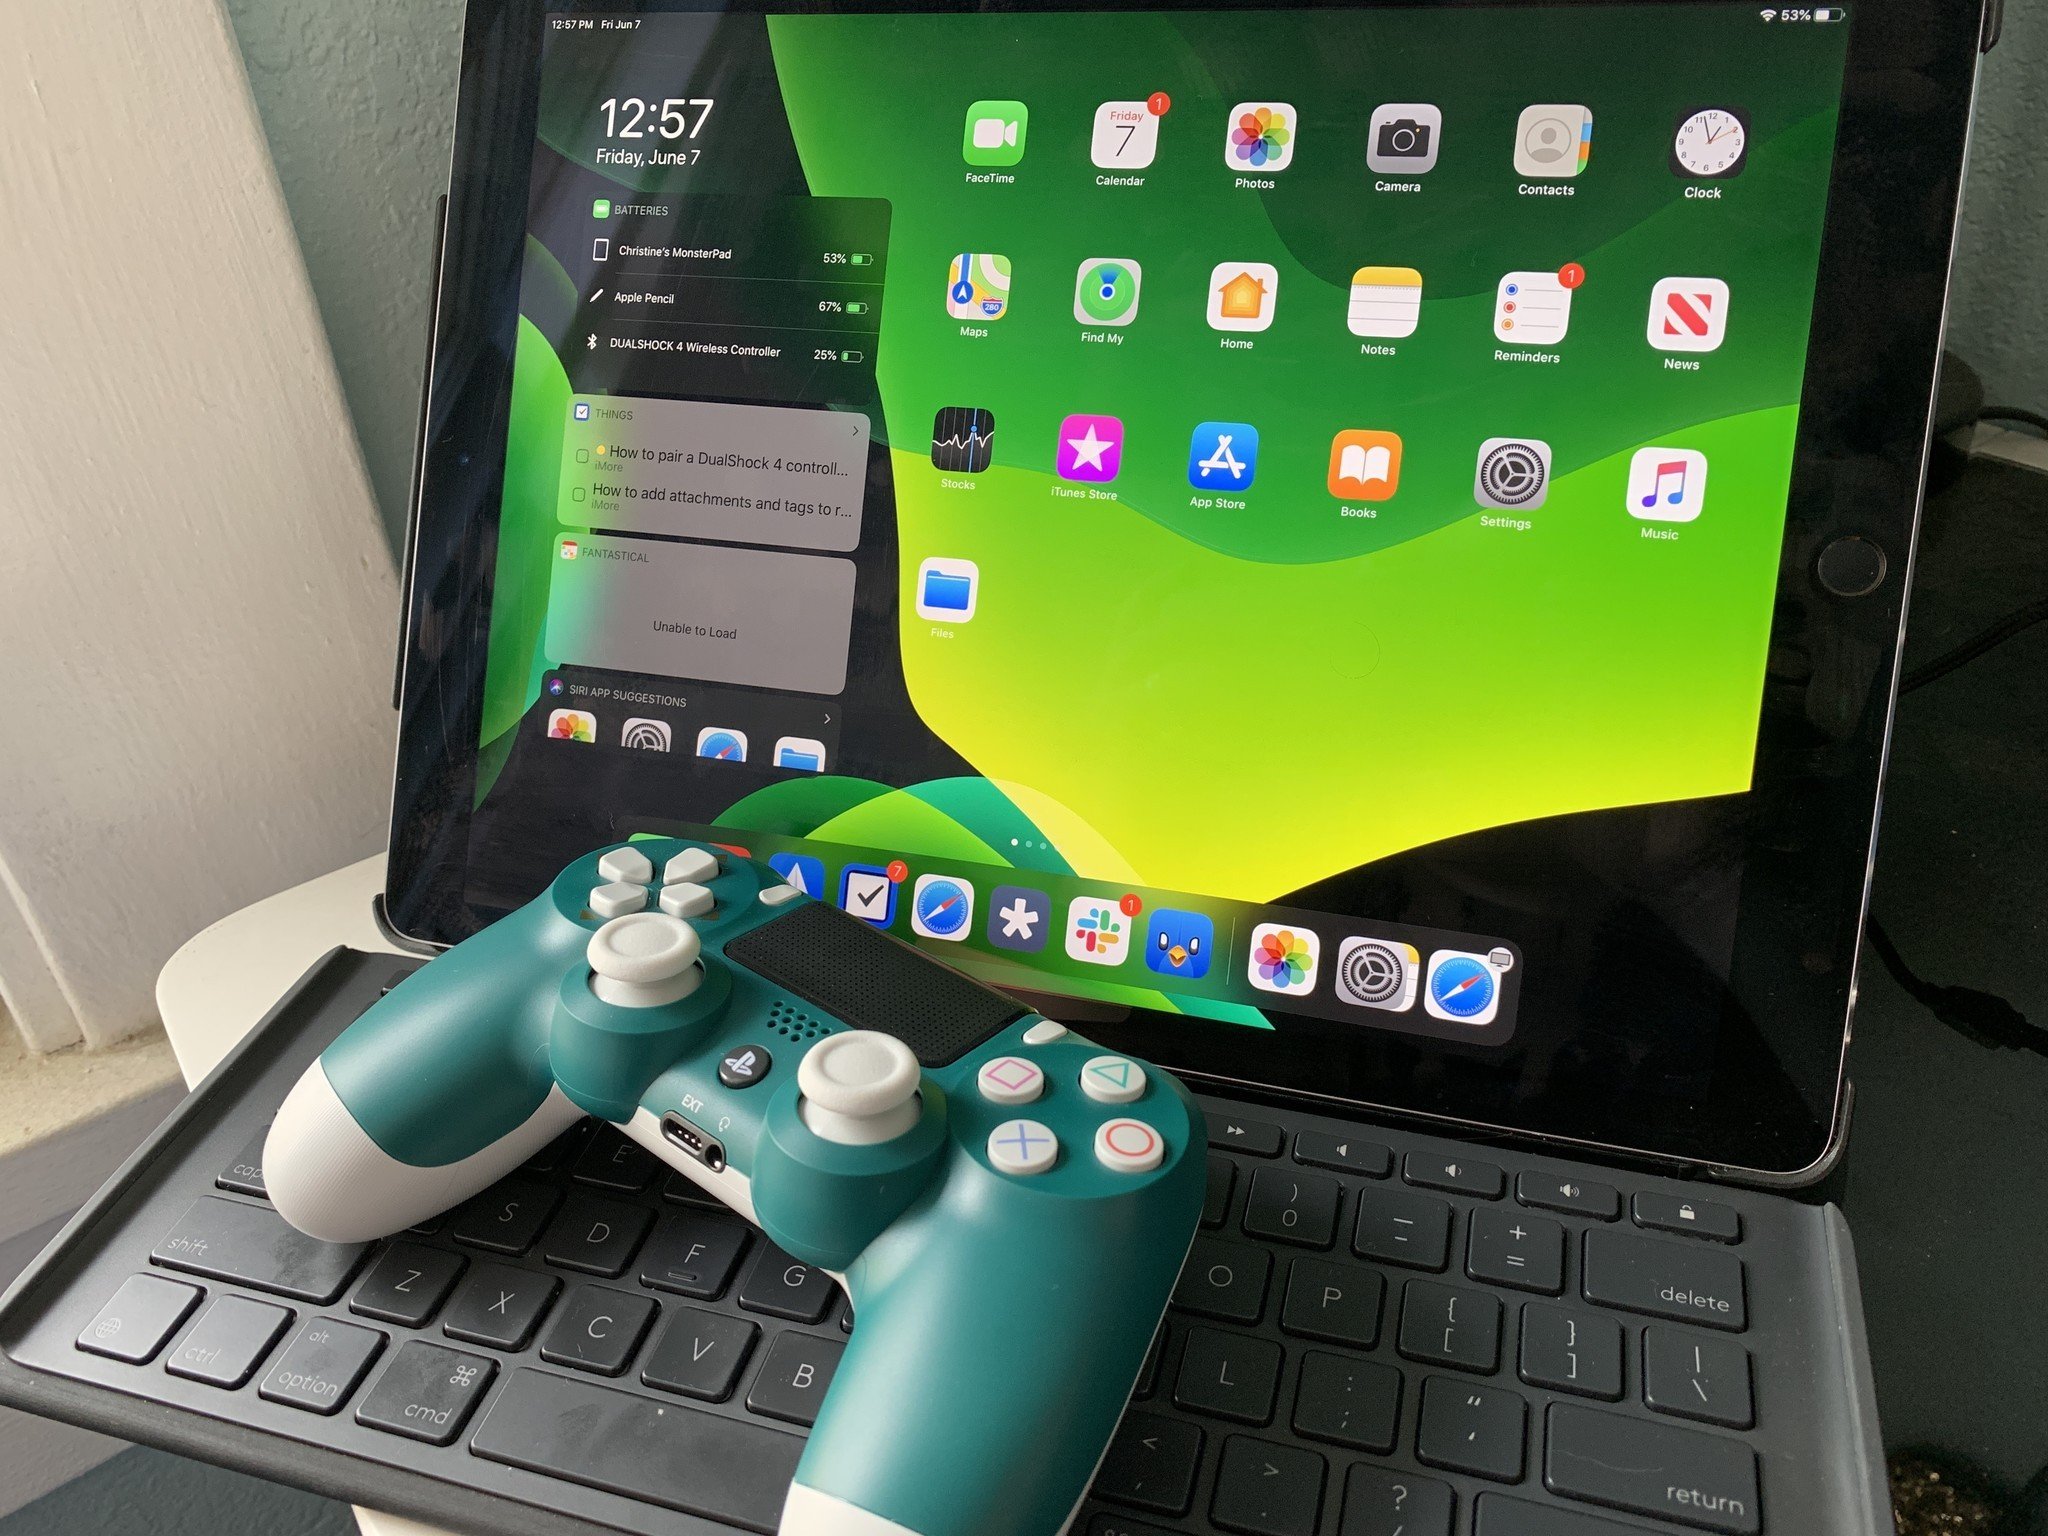 iPad Pro with DualShock 4 controller